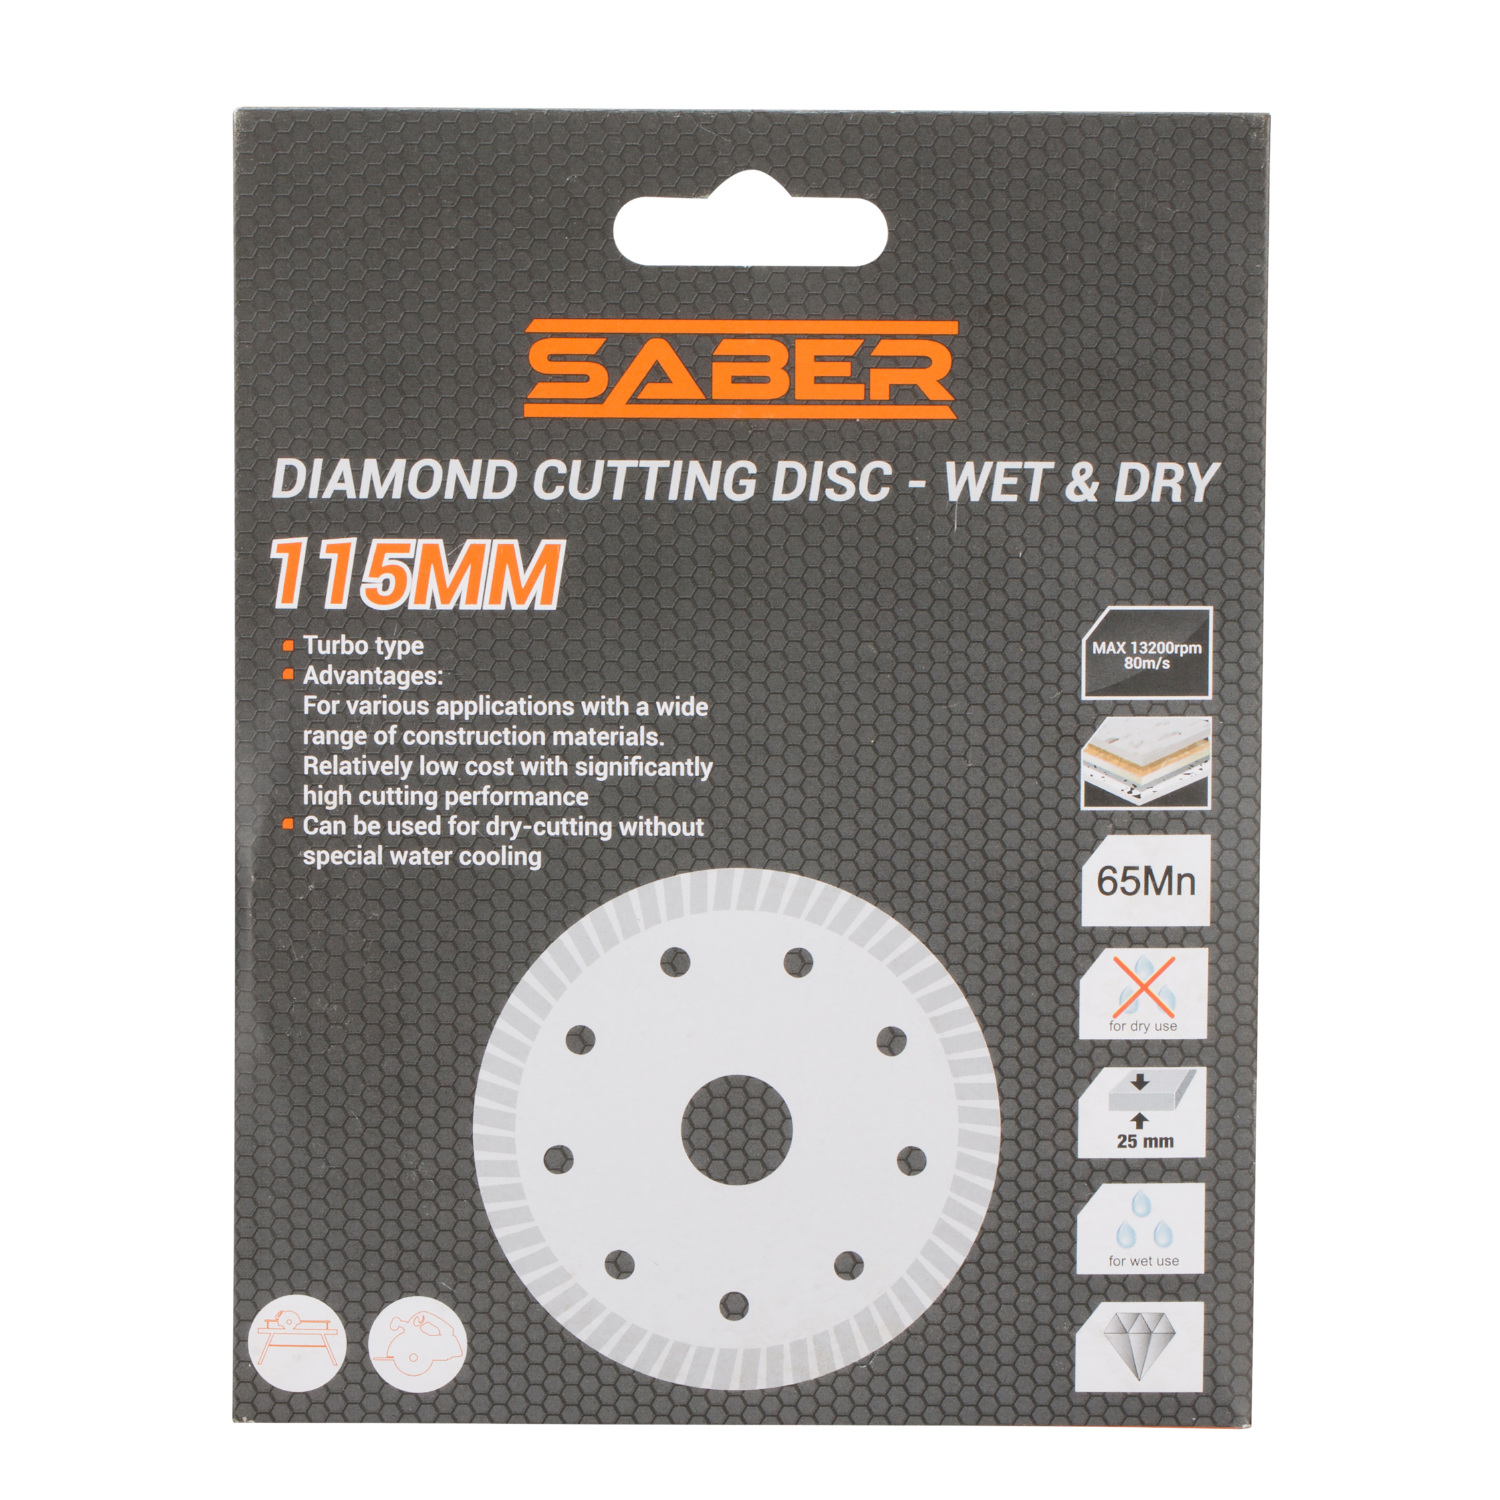 Saber 115mm Diamond Cutting Disc - Wet and Dry Image